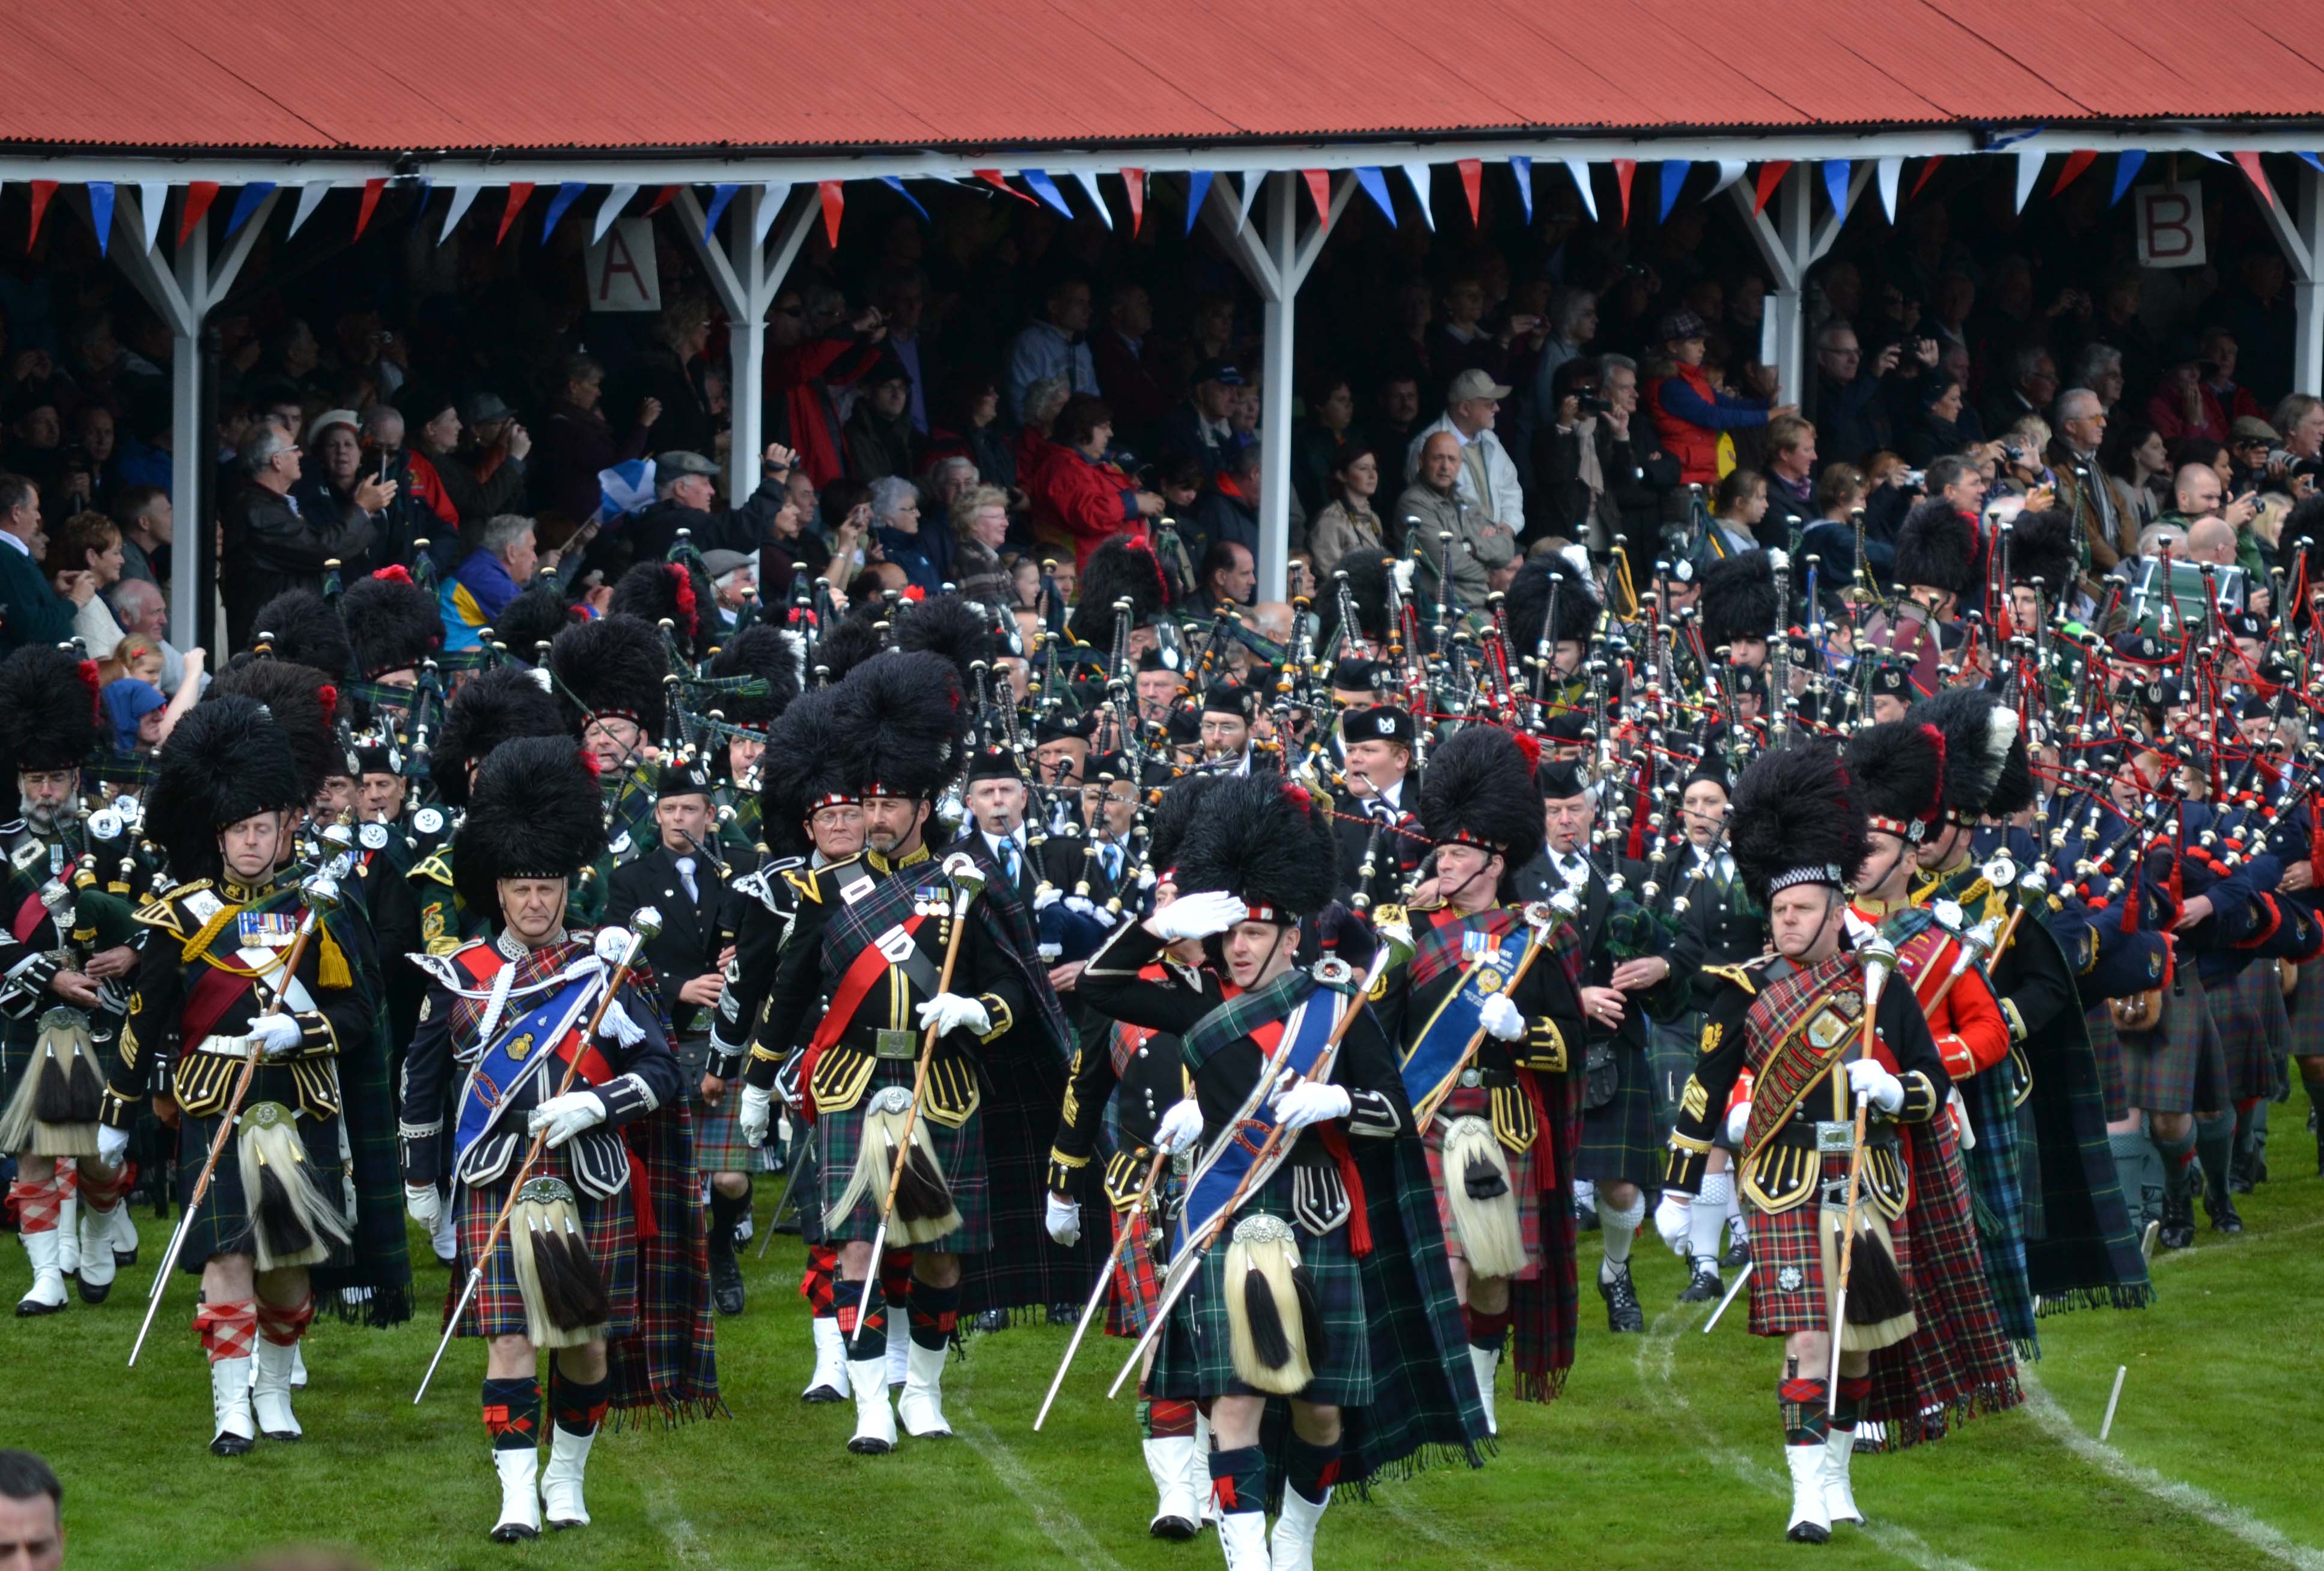 Wrap up for the Braemar Gathering